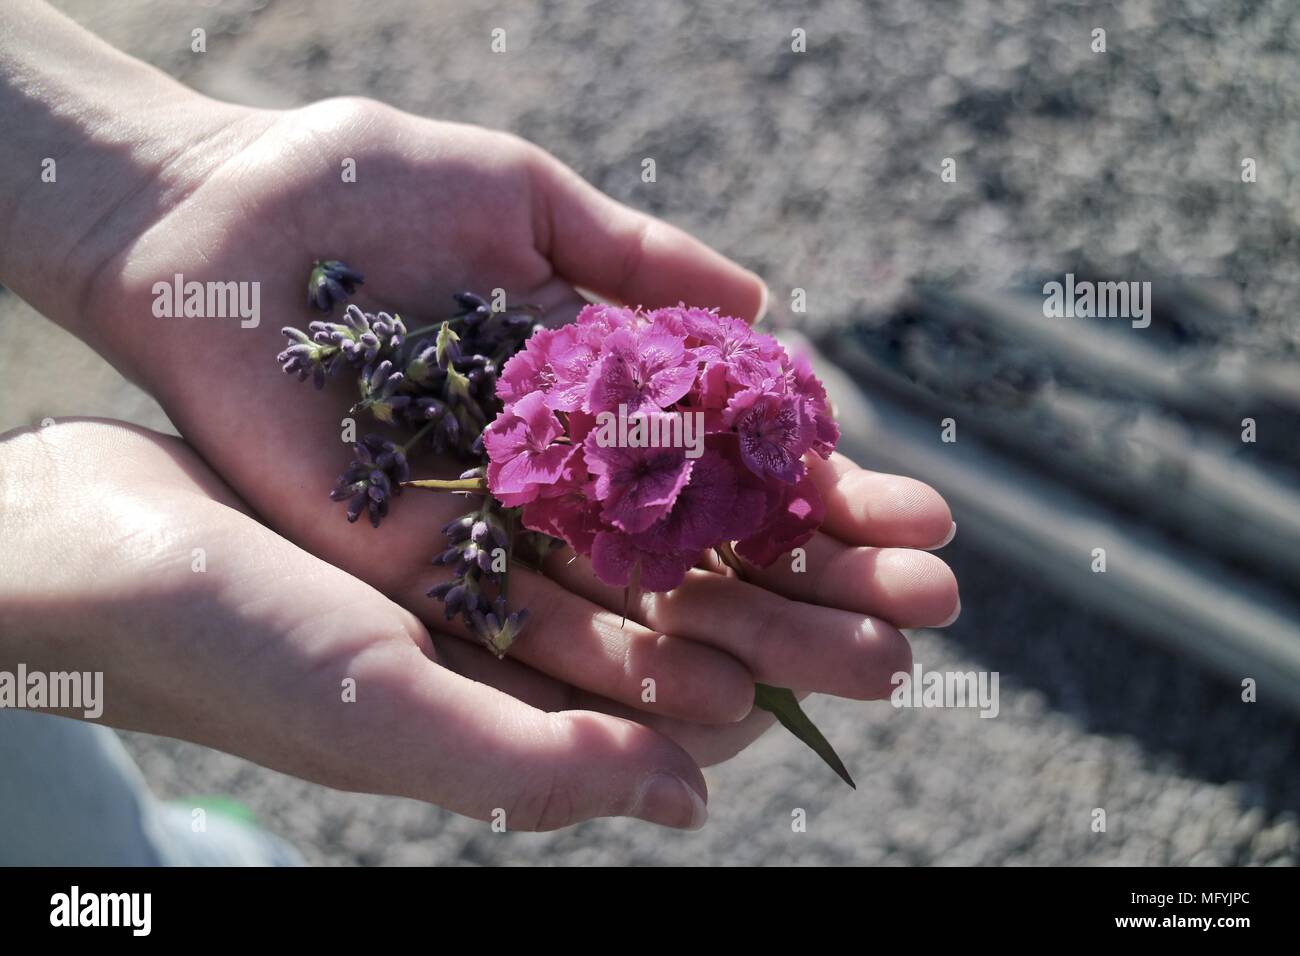 Hands holding flowers Stock Photo